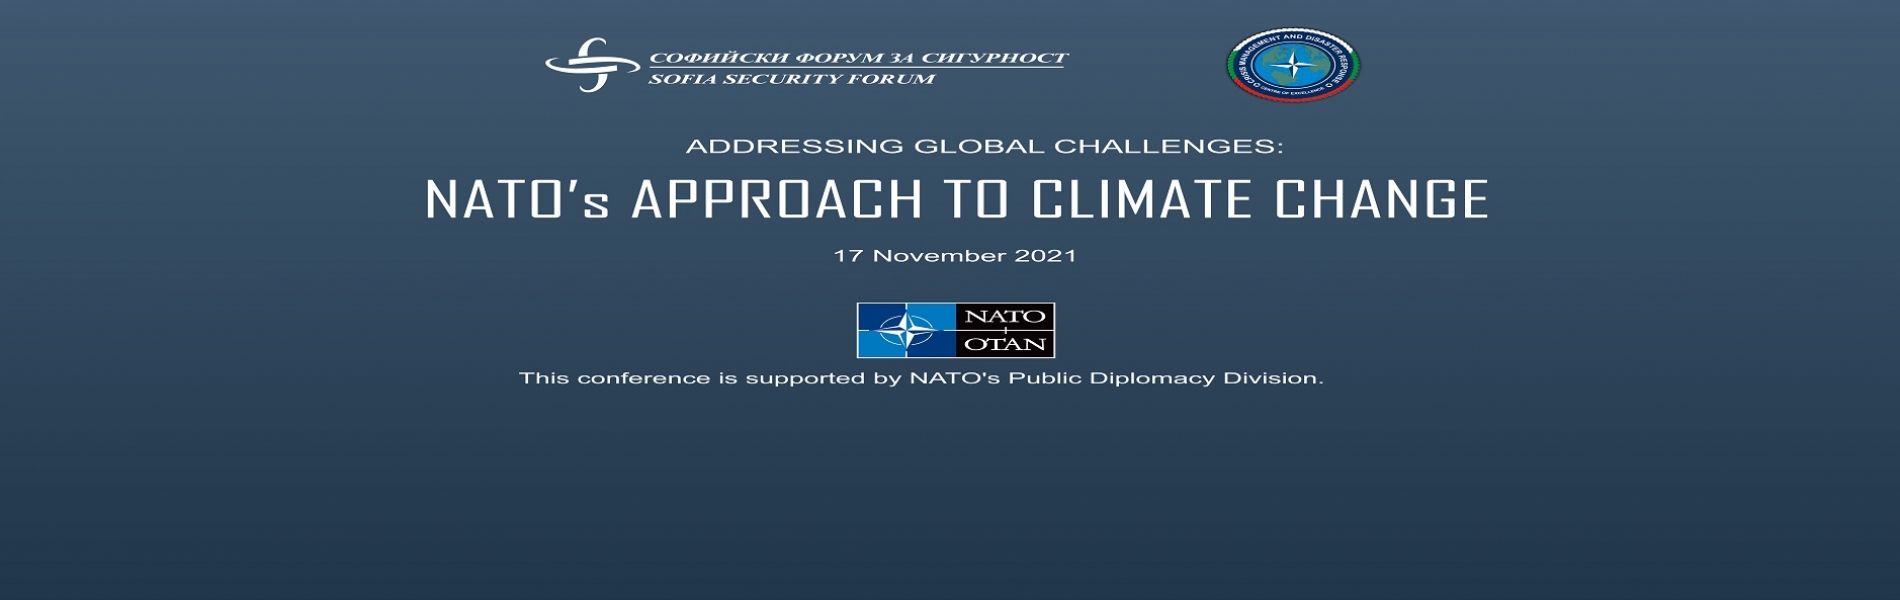 International Conference Addressing global challenges: NATO′S approach to climate change, 17 November 2021